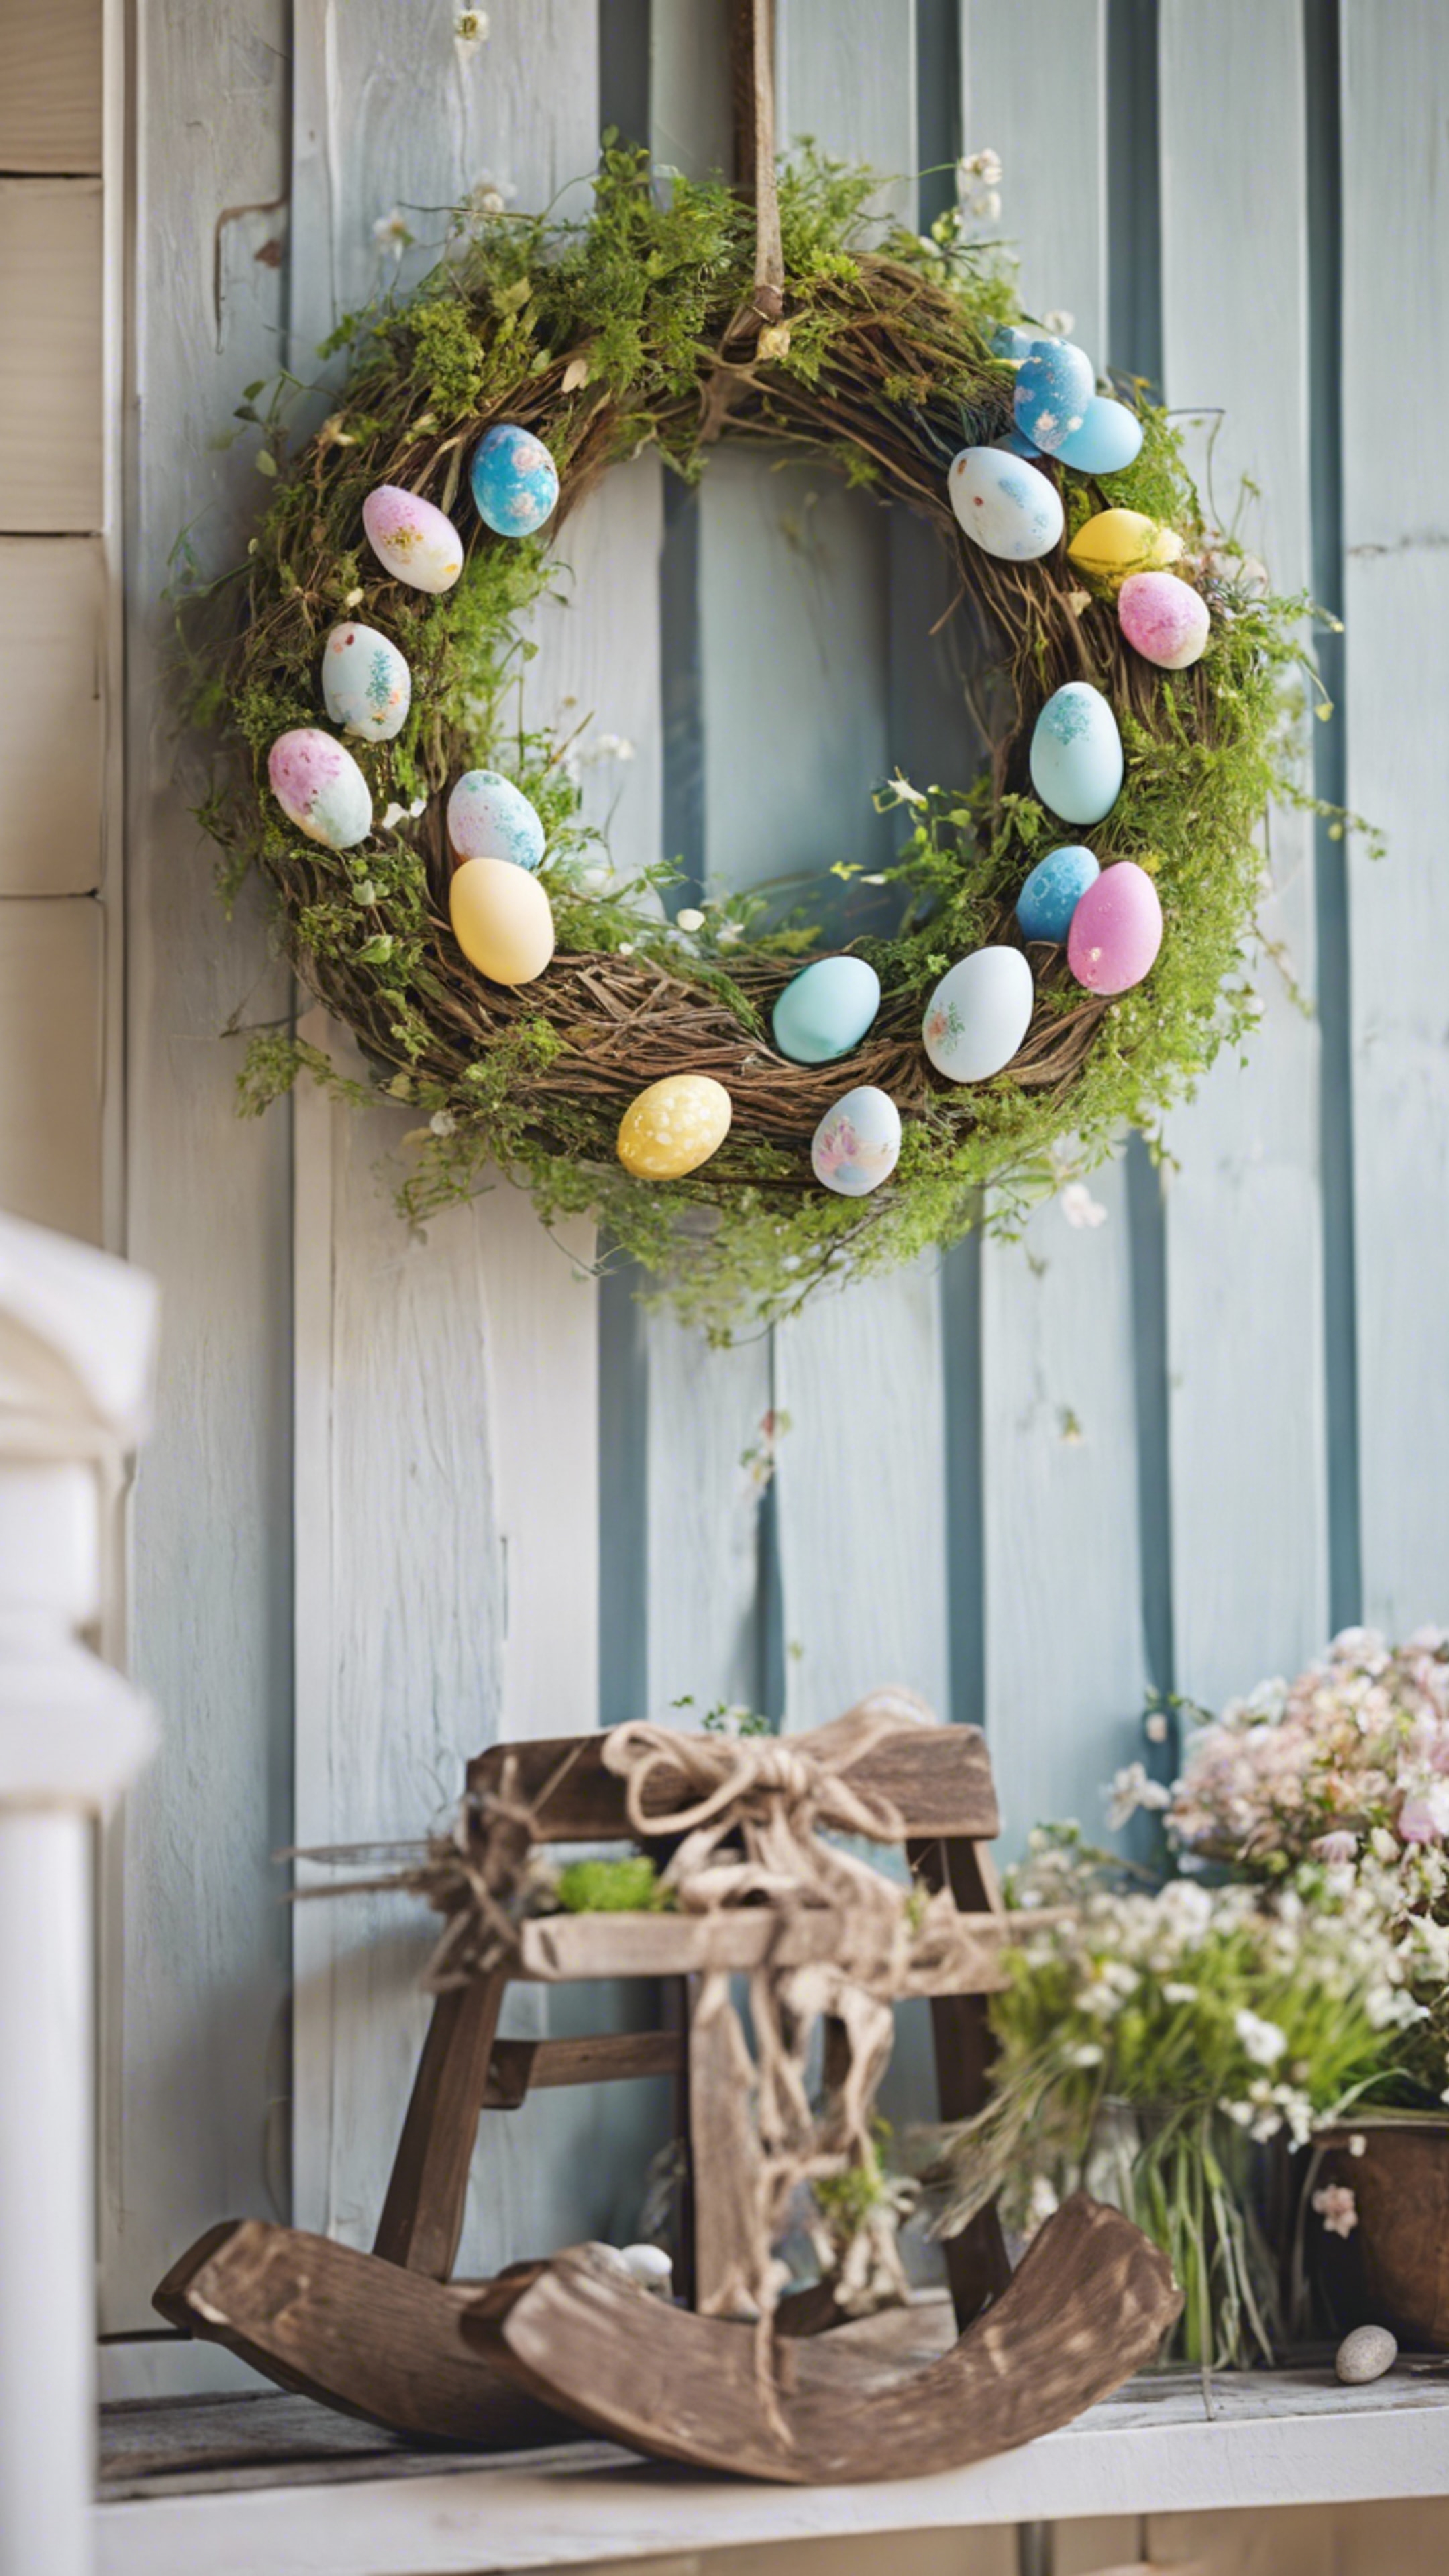 Country-style Easter decorative wreath hanging on a front porch, inviting the spring spirits.壁紙[efa72fd9539f4de39955]